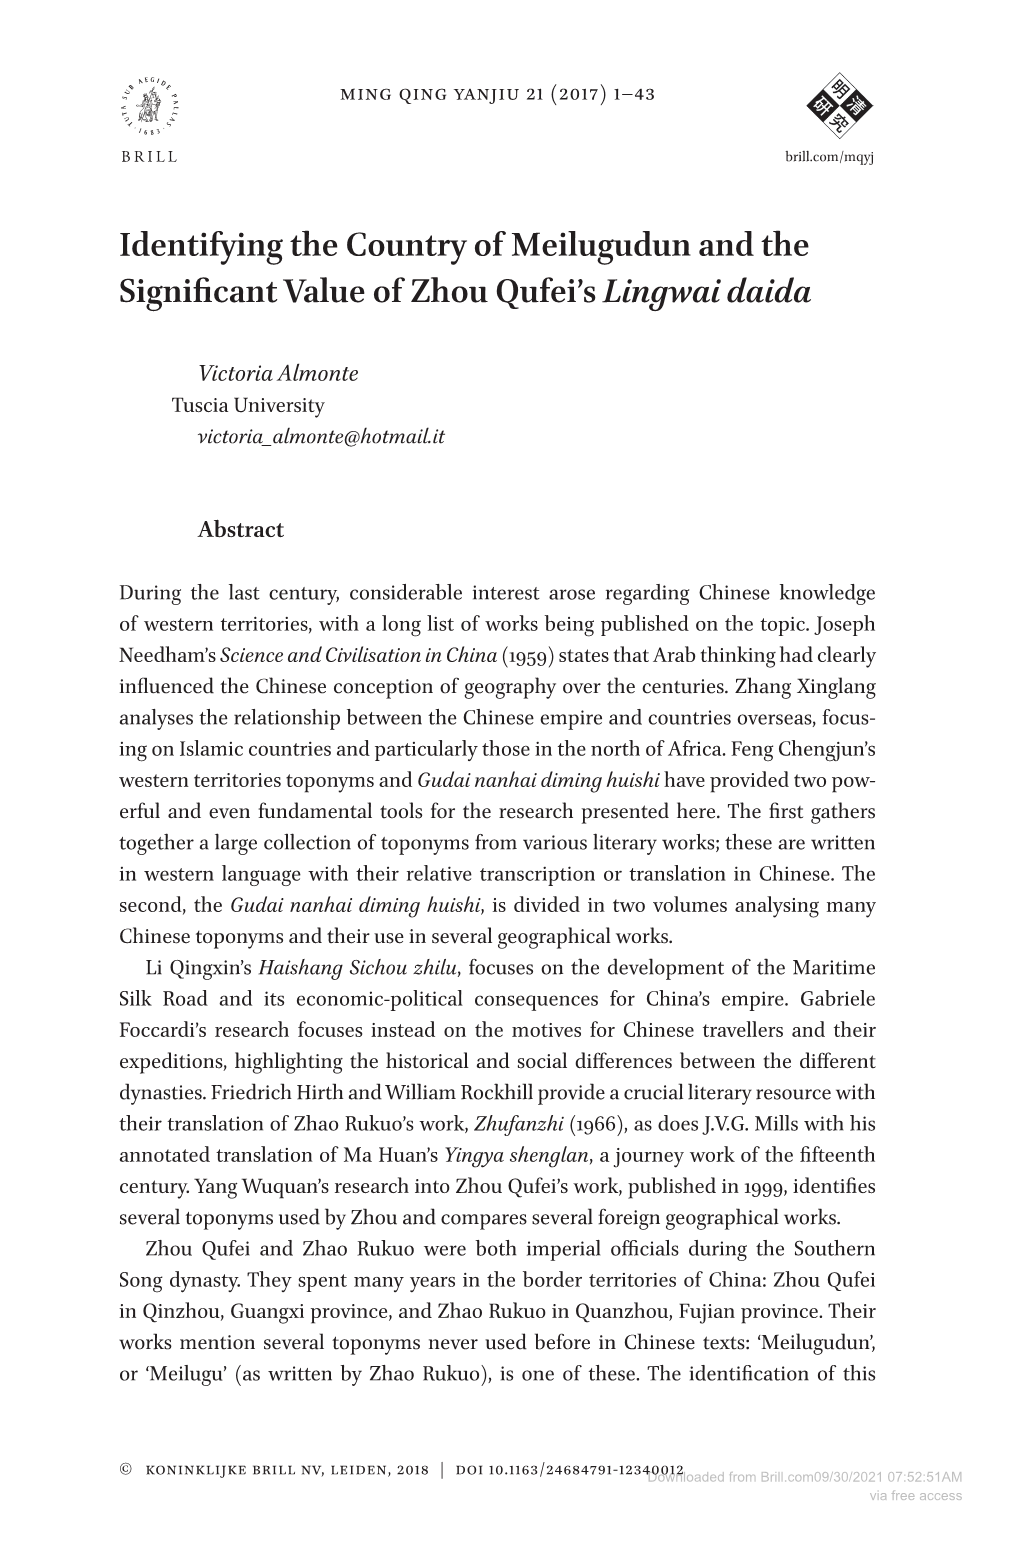 Identifying the Country of Meilugudun and the Significant Value of Zhou Qufei's Lingwai Daida